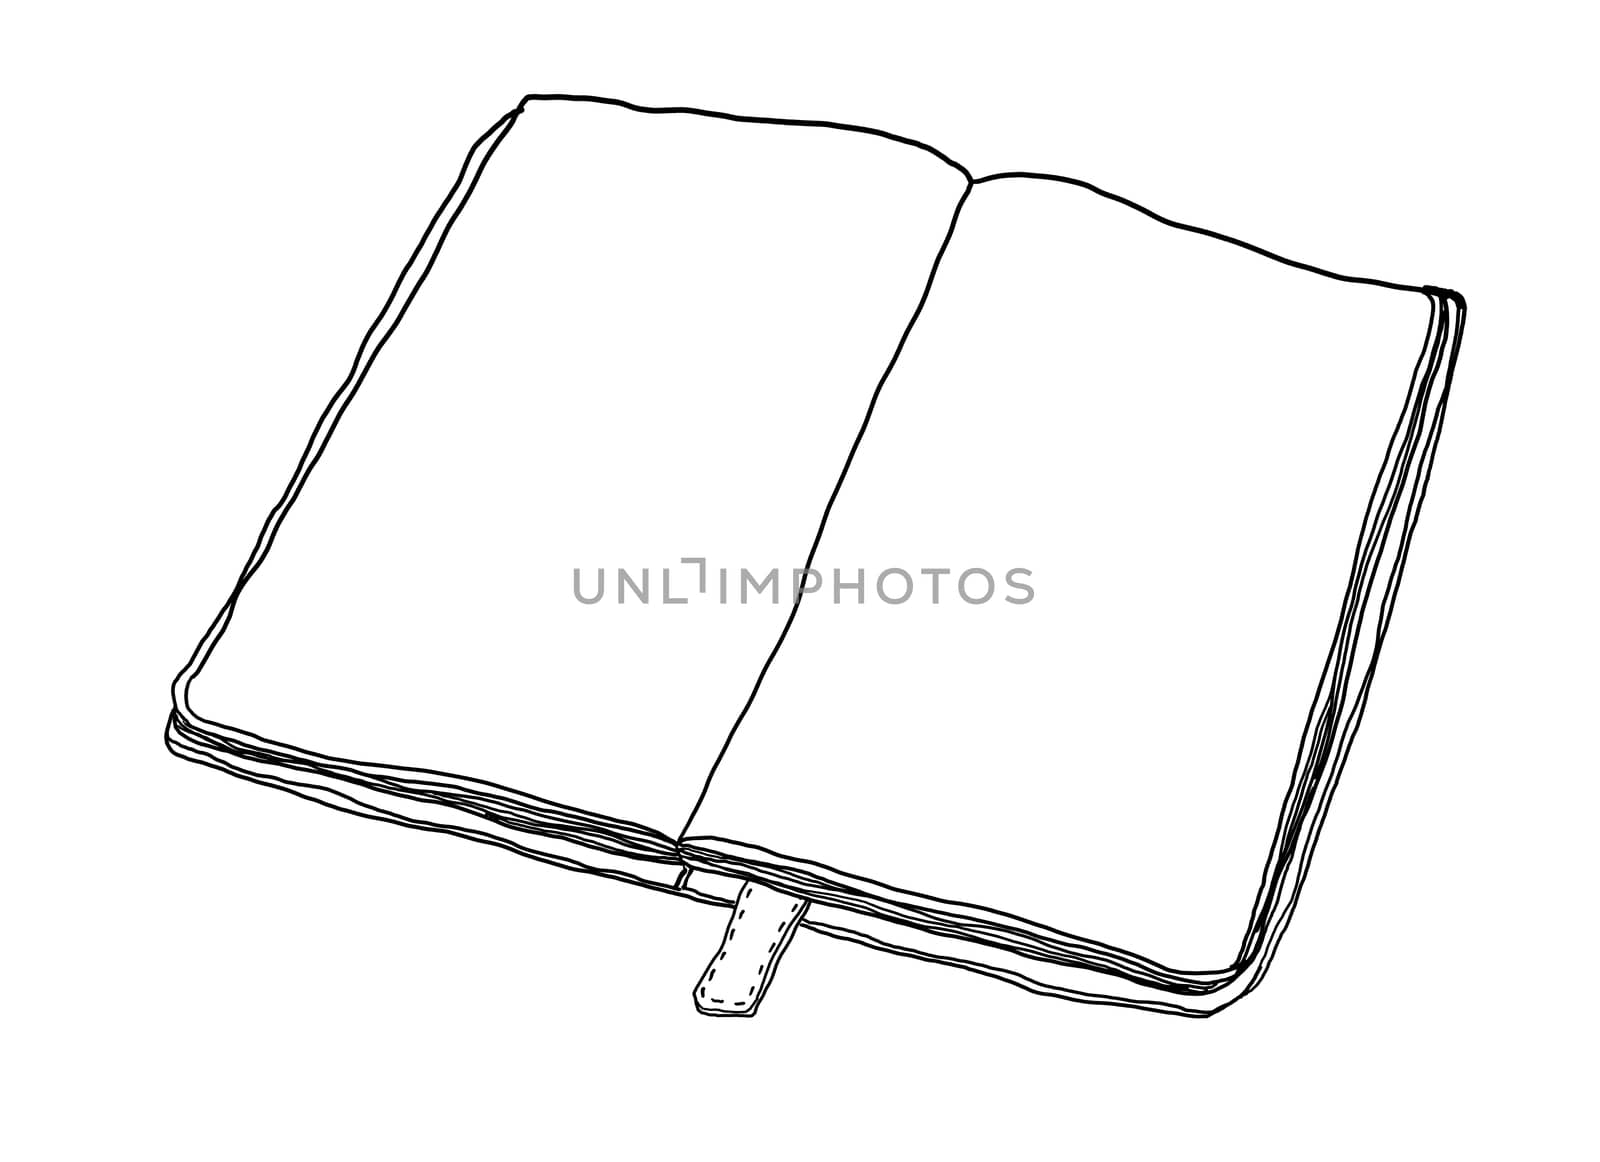 red notebook Open Blank Page line art illusyration